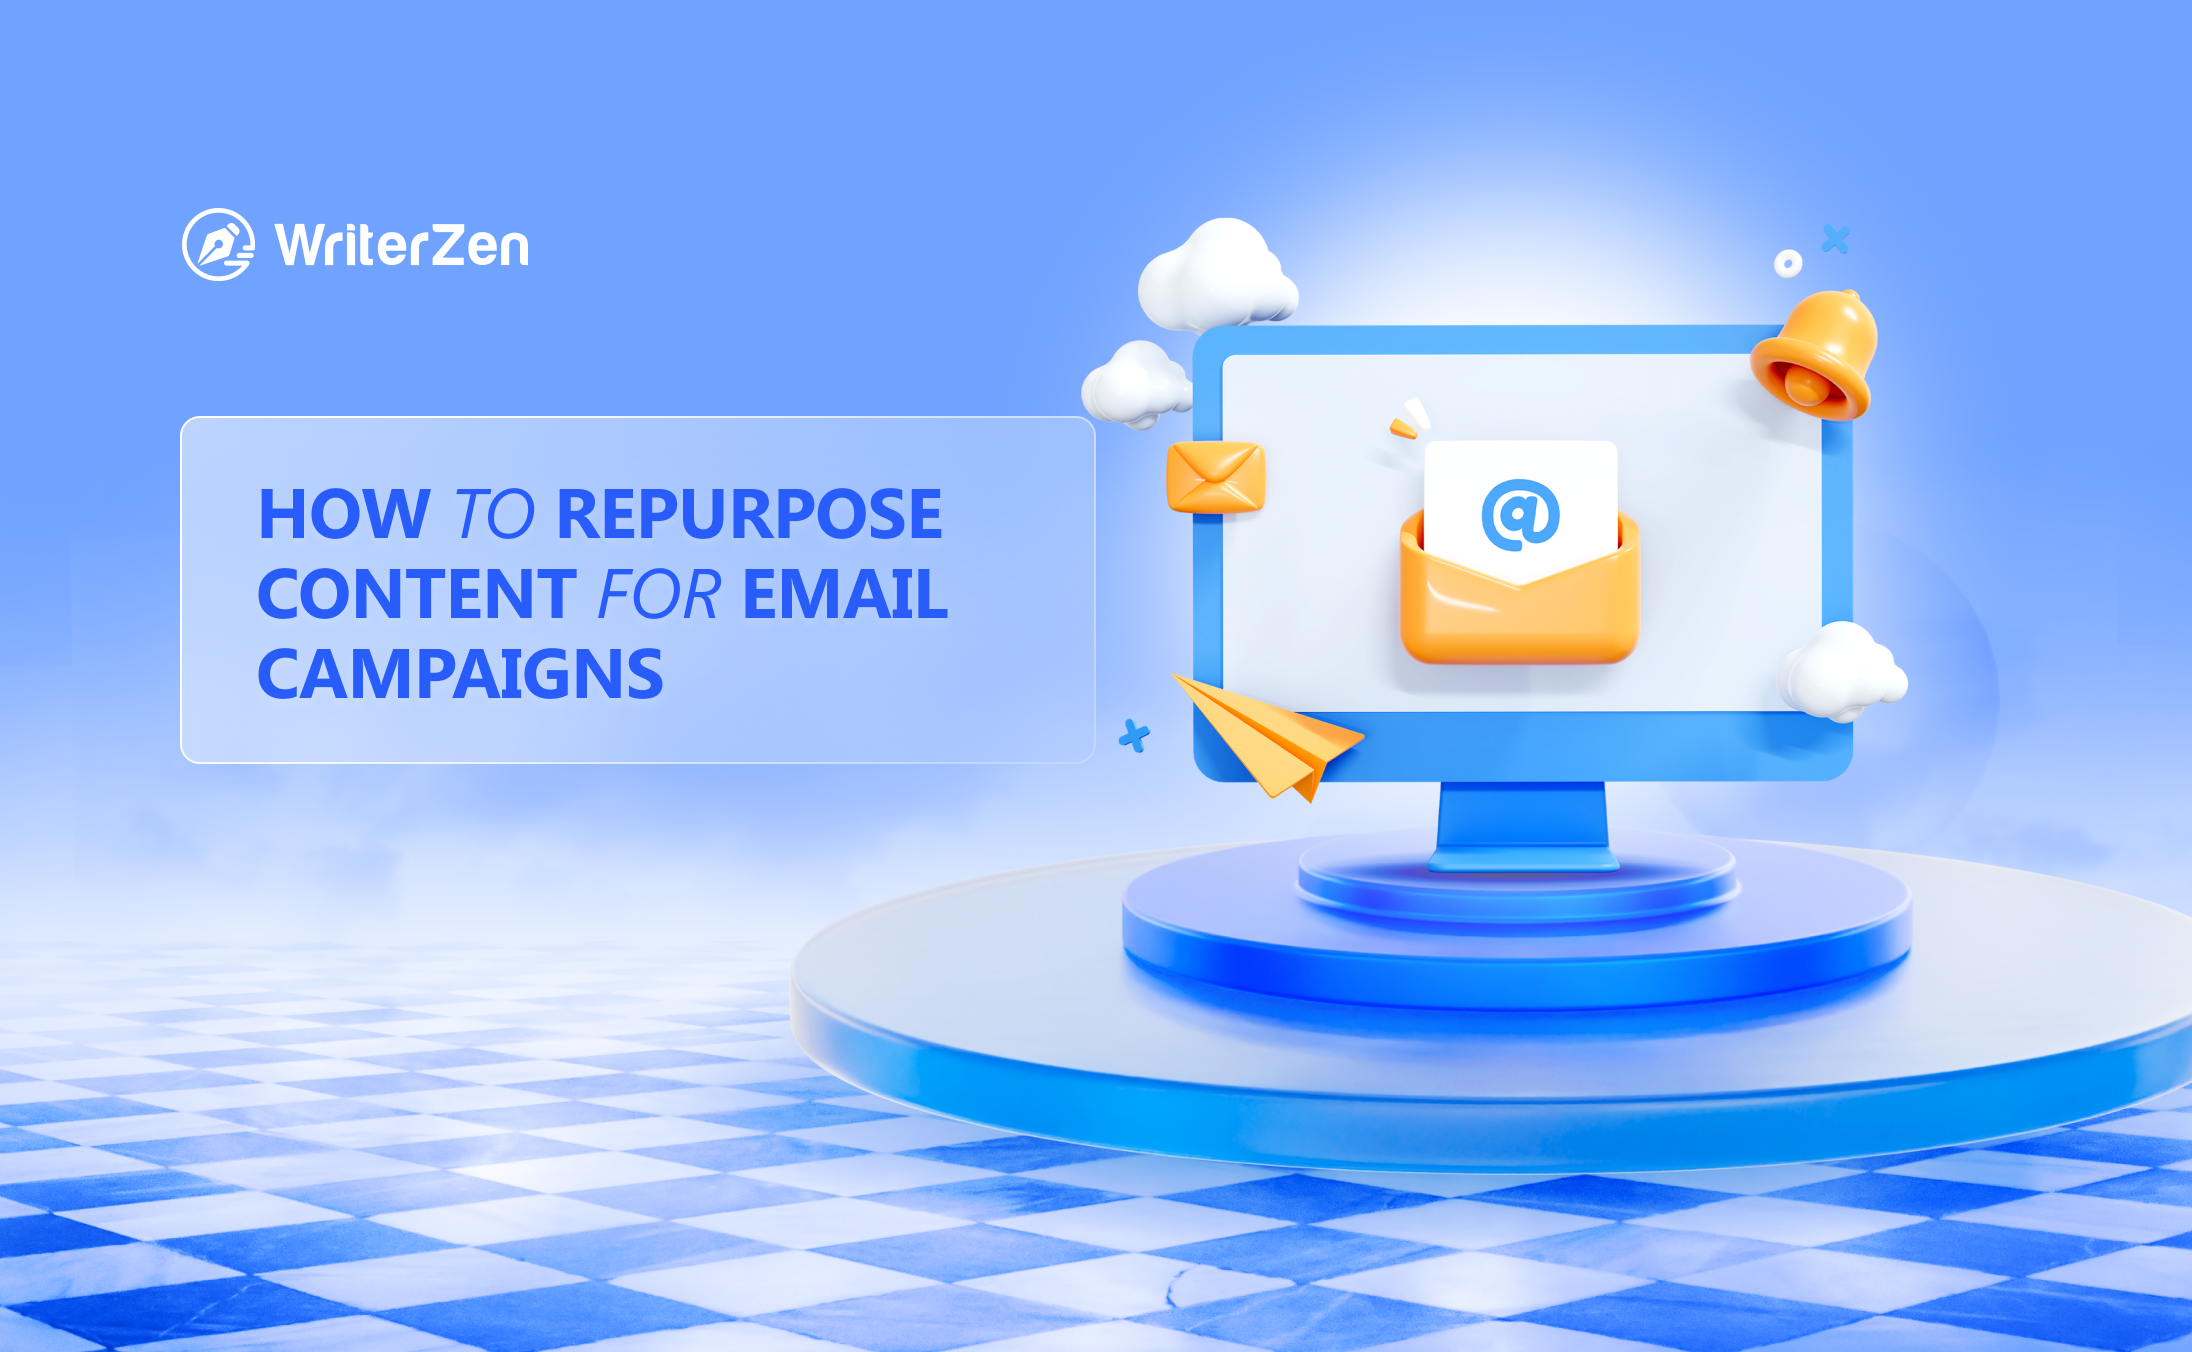 How To Repurpose Content for Email Campaigns